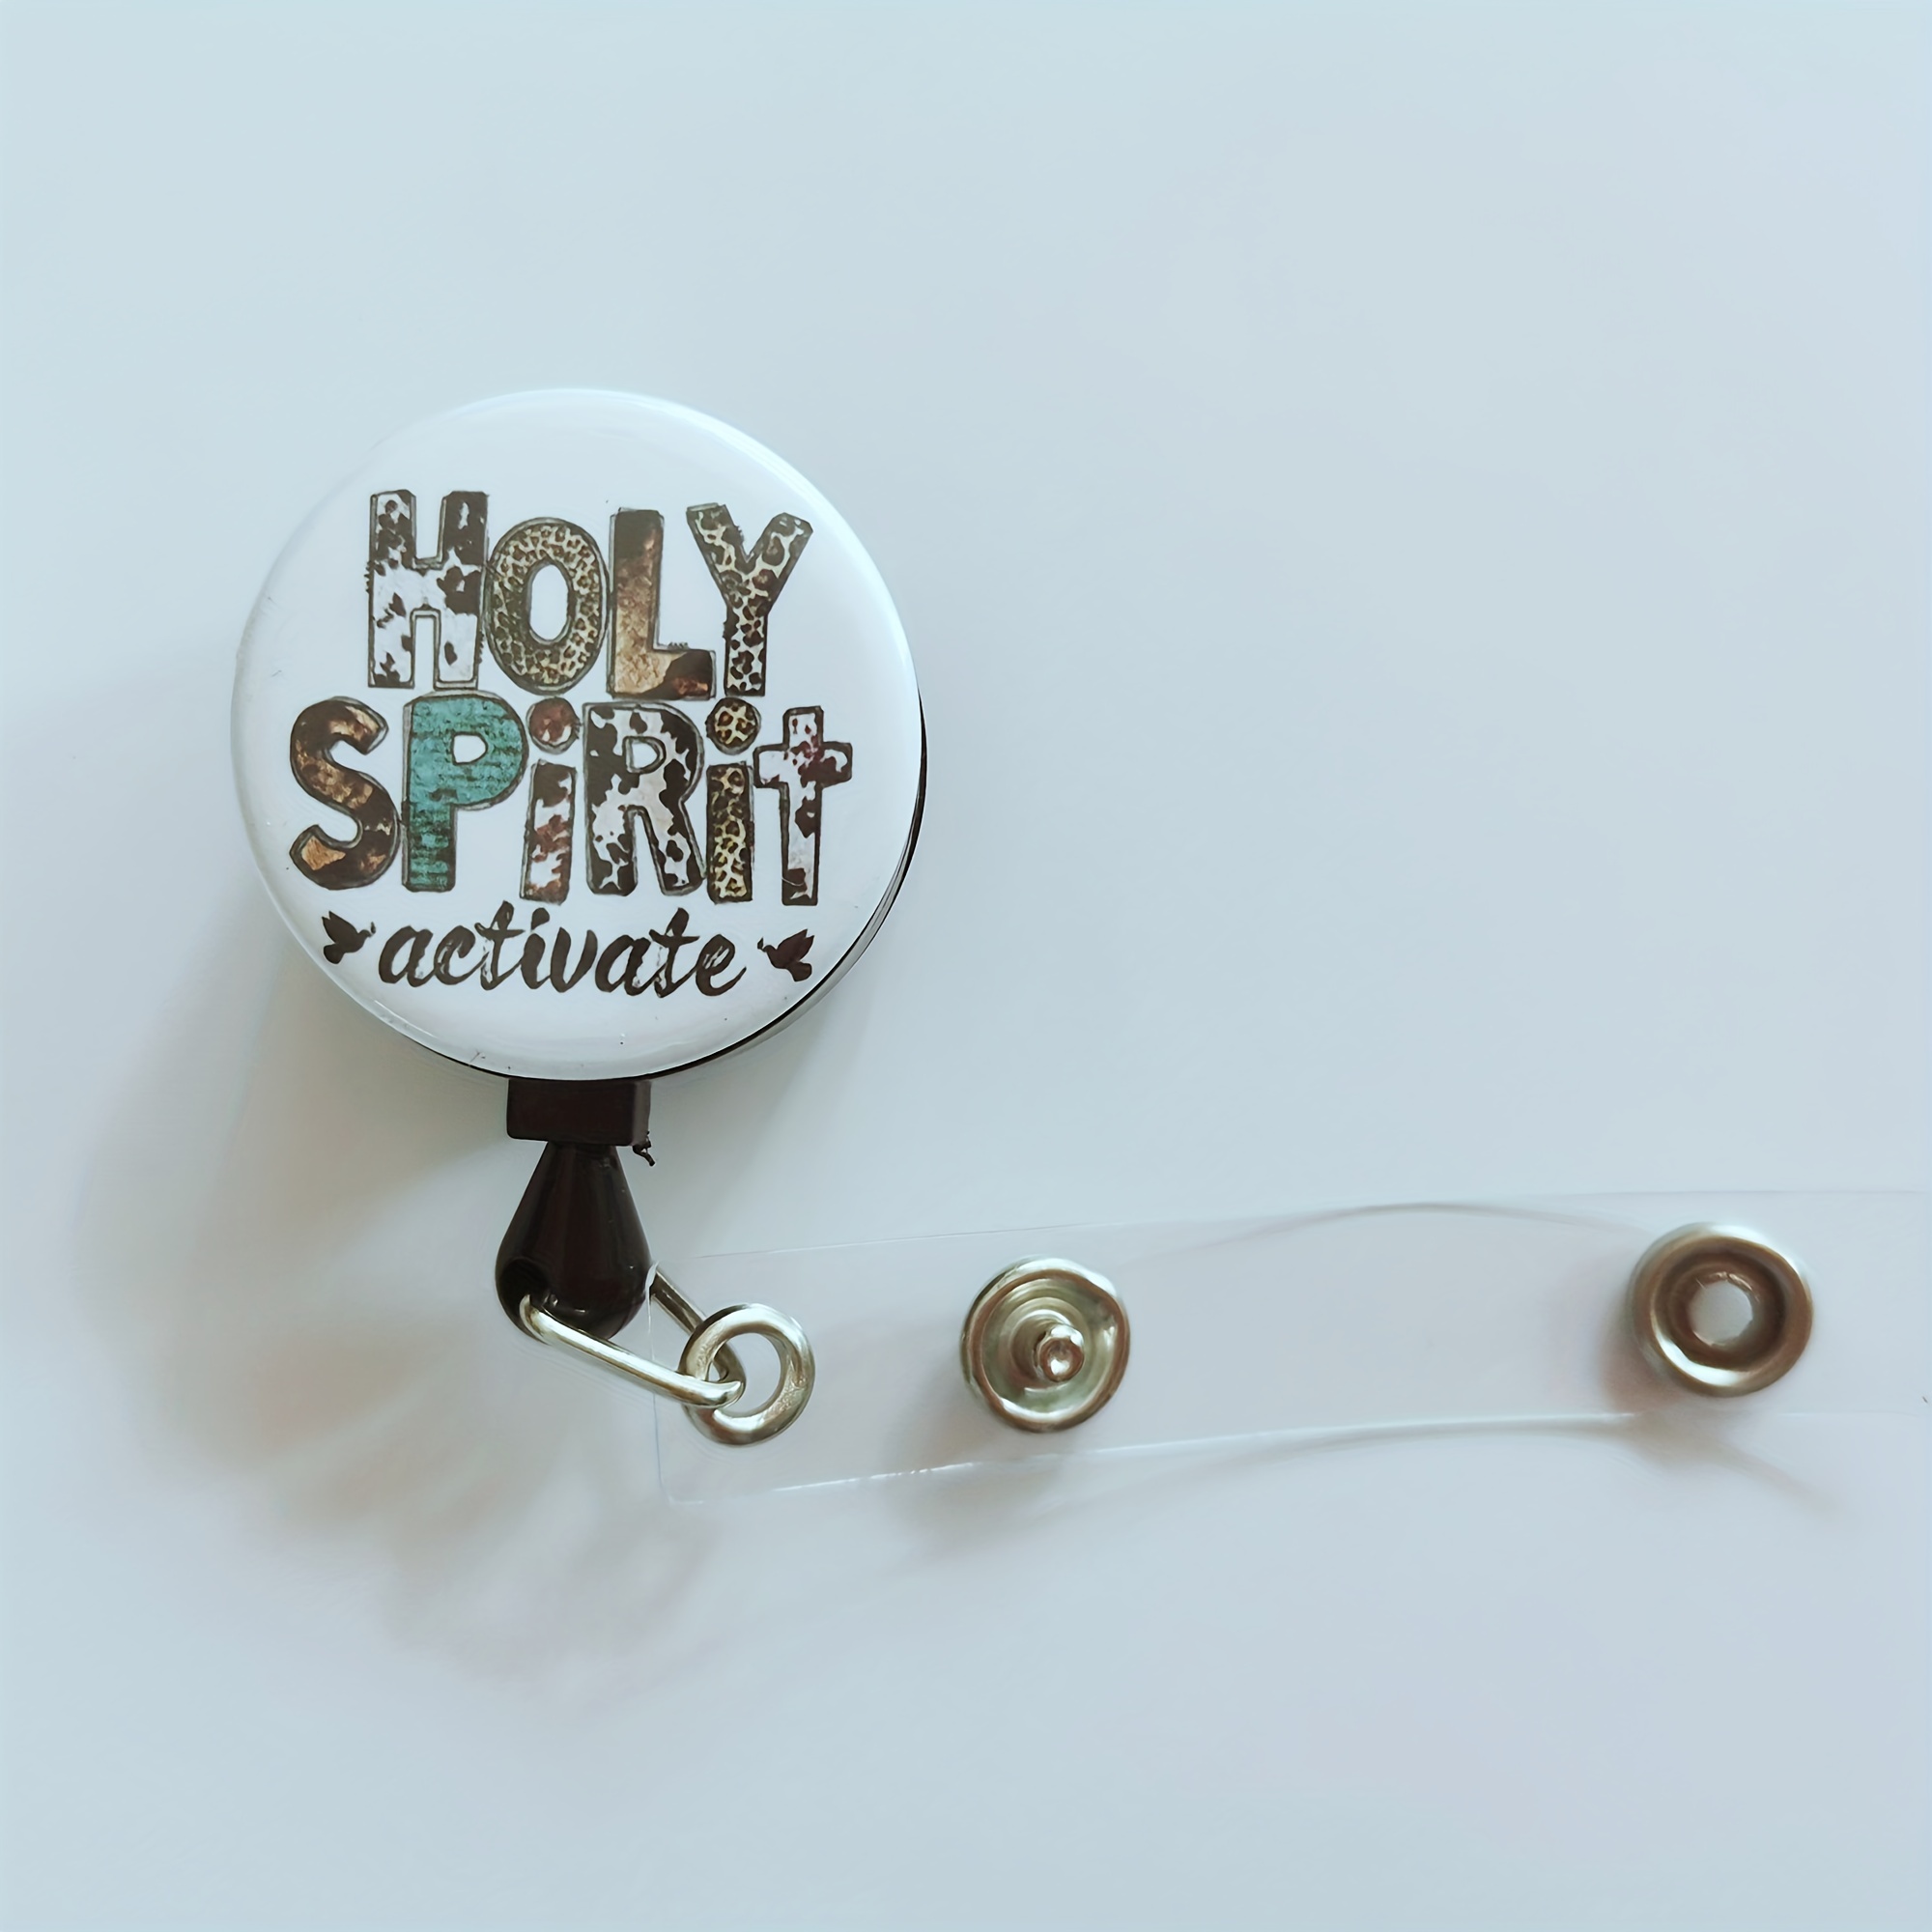 Badge Reels Retractable with Metal Clip Funny Sarcastic Motivational Holy Spirit Activate Badge Holder Nurse Teacher Student Work Office Name ID